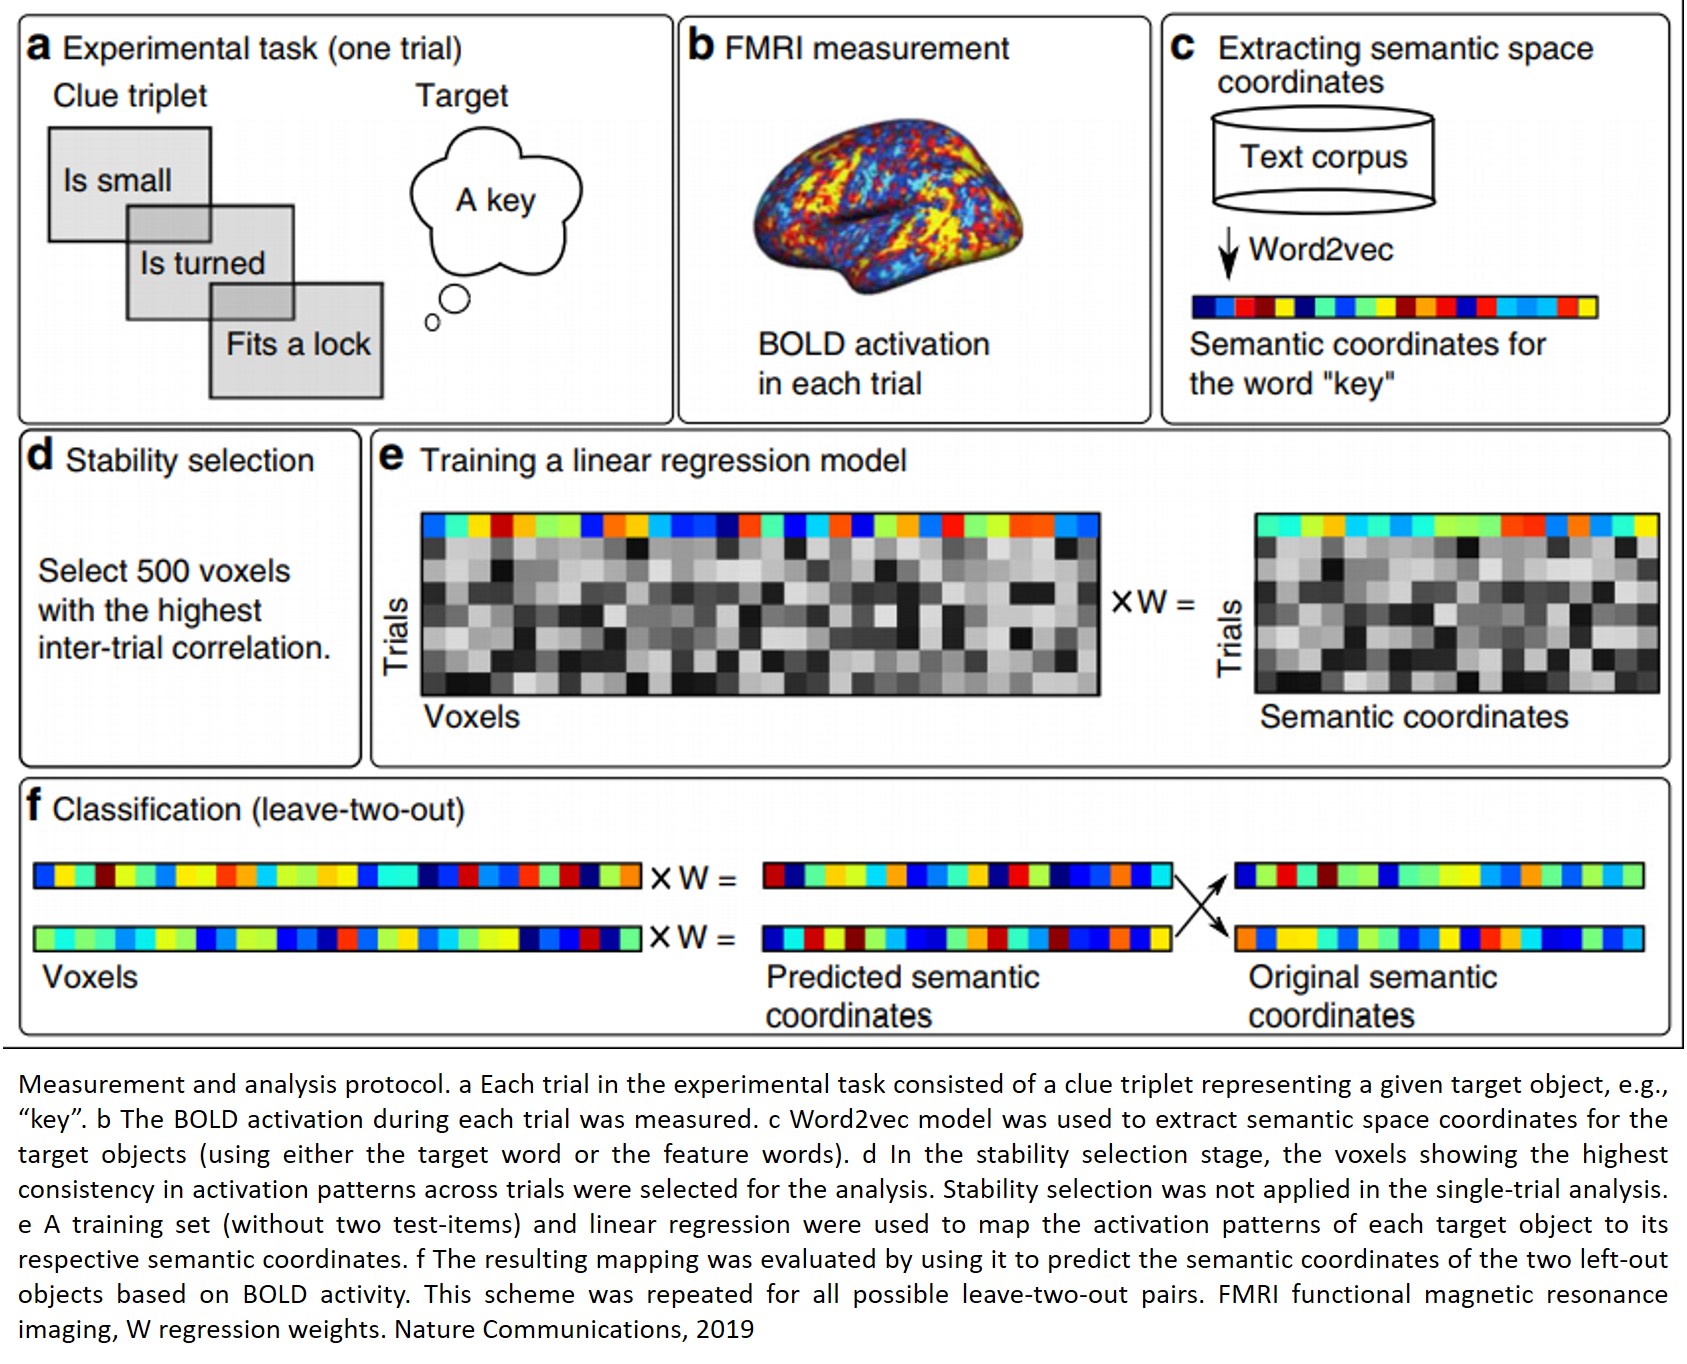 How the brain reconstructs meaning of an object with bits of information